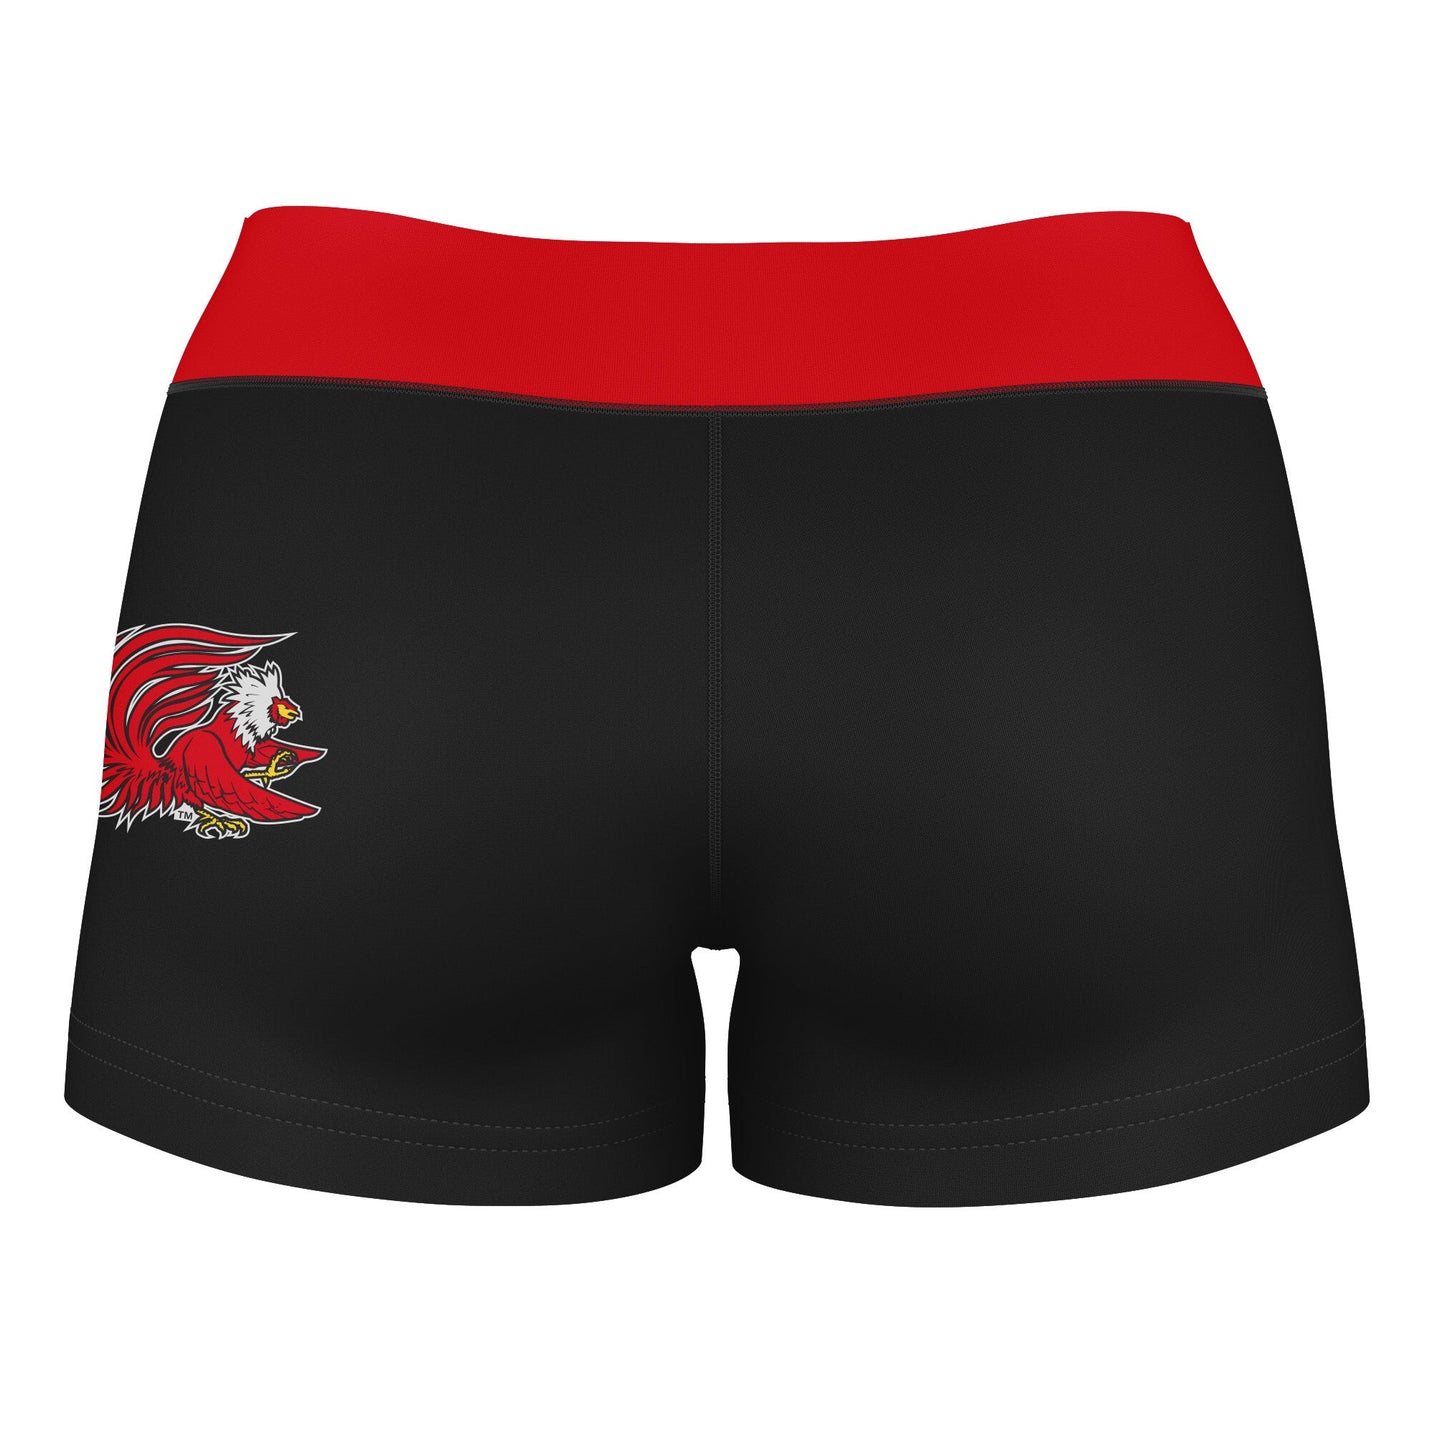 JSU Gamecocks Vive La Fete Game Day Logo on Thigh and Waistband Black & Red Women Yoga Booty Workout Shorts 3.75 Inseam" - Vive La F̻te - Online Apparel Store